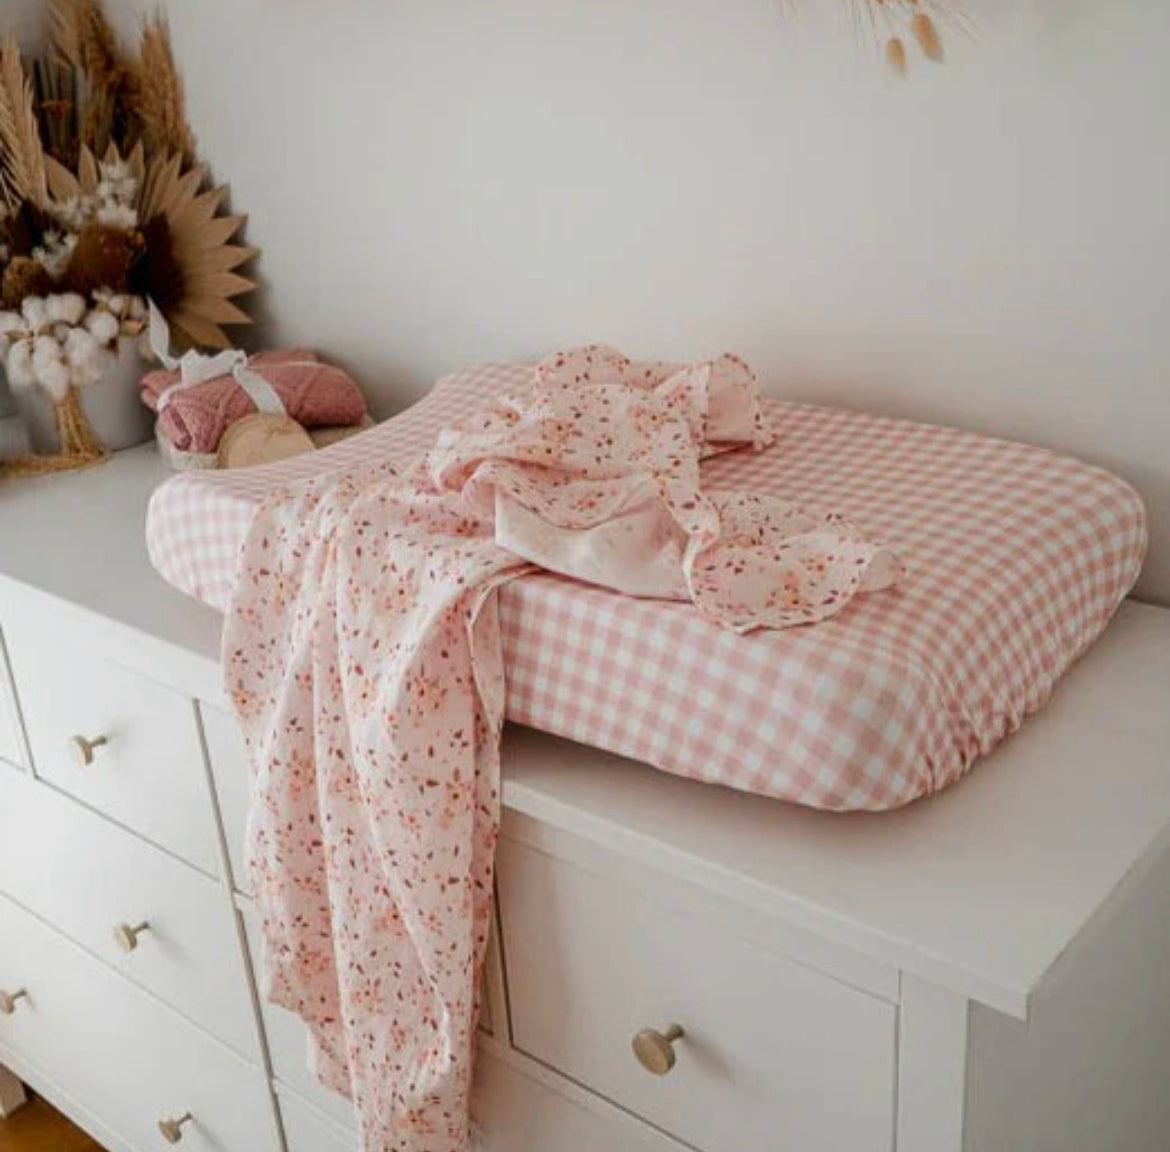 Peachy Pink gingham two-tone fabric adds a classic aesthic with an element of understanted boho to any nursery.  Bassinet sheet is designed for safety, purity and peace of mind for both you and your little love.   